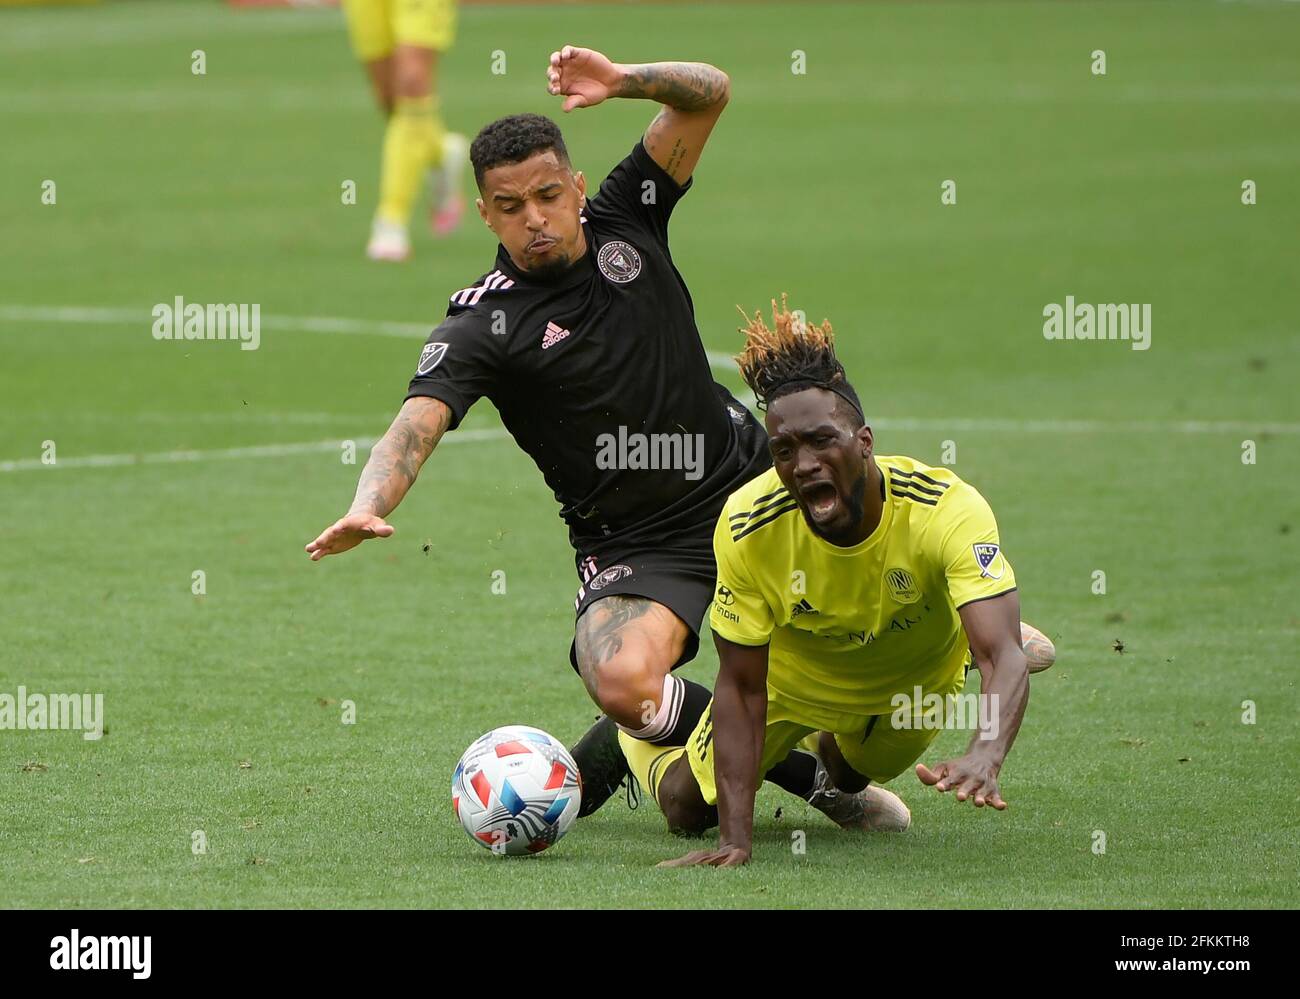 May 2, 2021: Inter Miami CF midfielder Gregore (26) takes down Nashville SC forward Charles Sapong (17) during the second half of an MLS game between the Inter Miami CF and the Nashville SC at Nissan Stadium in Nashville TN (Mandatory Photo Credit: Steve Roberts/CSM) Stock Photo